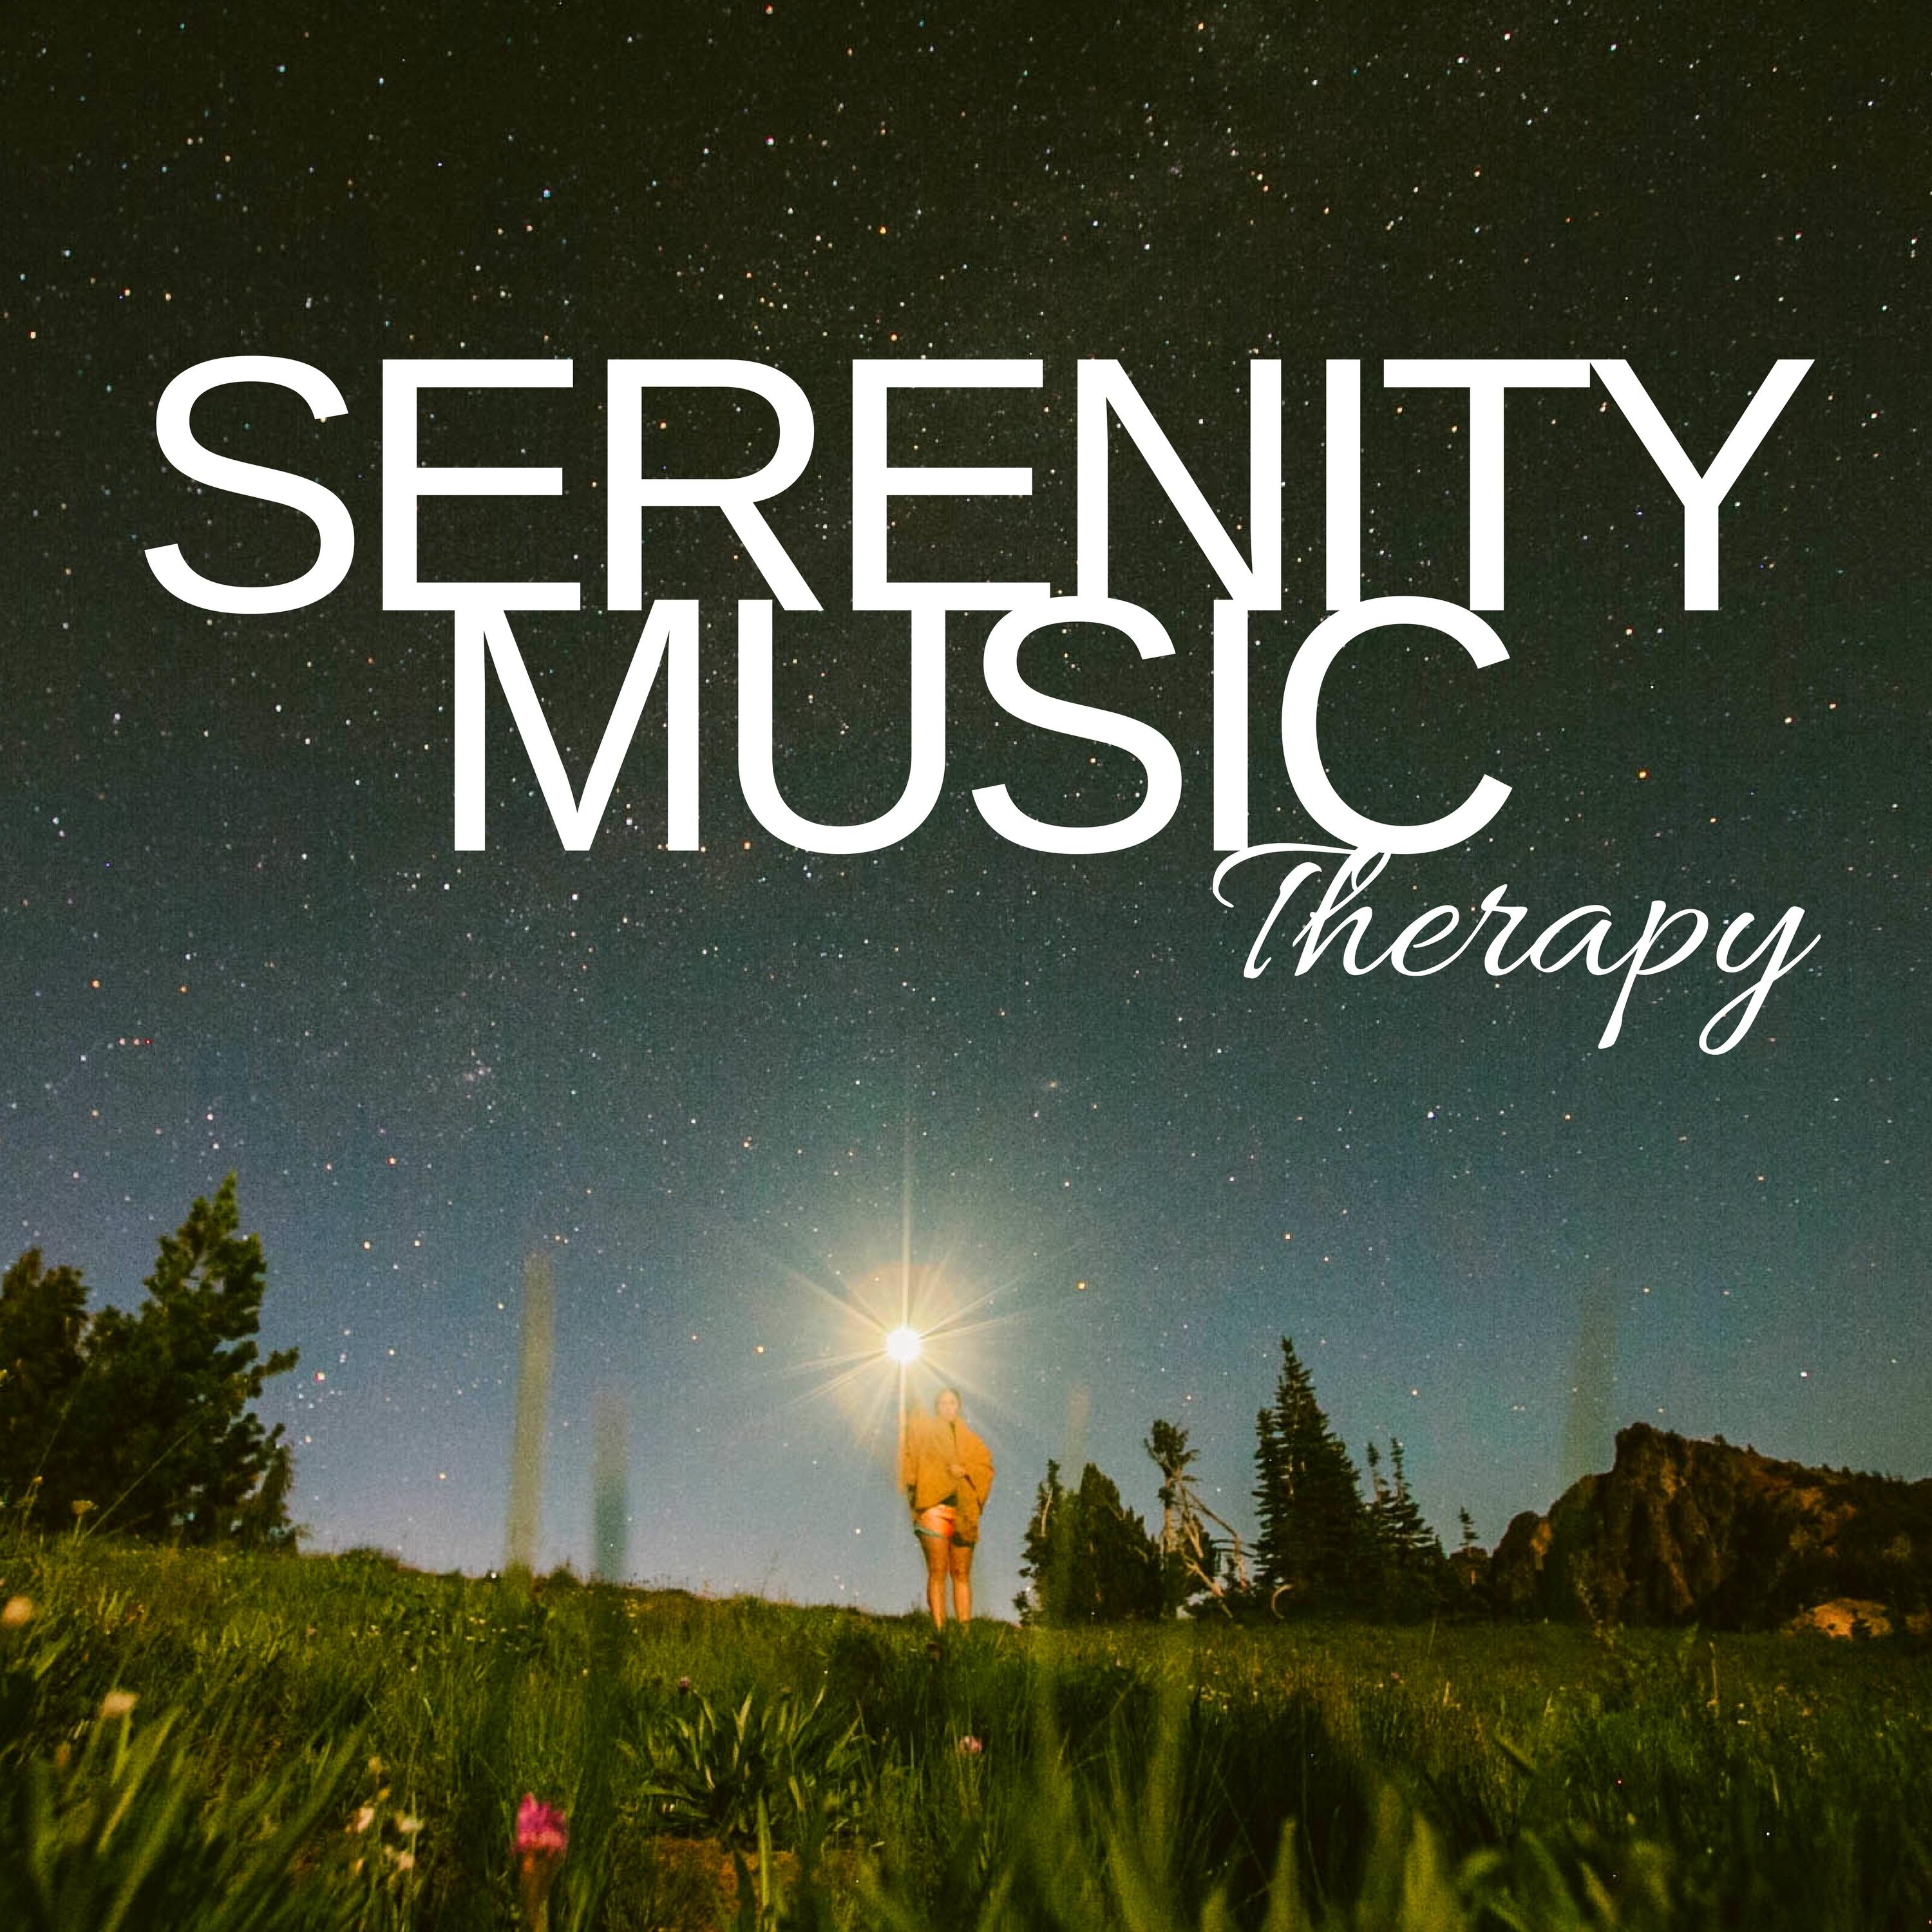 Serenity Music Therapy